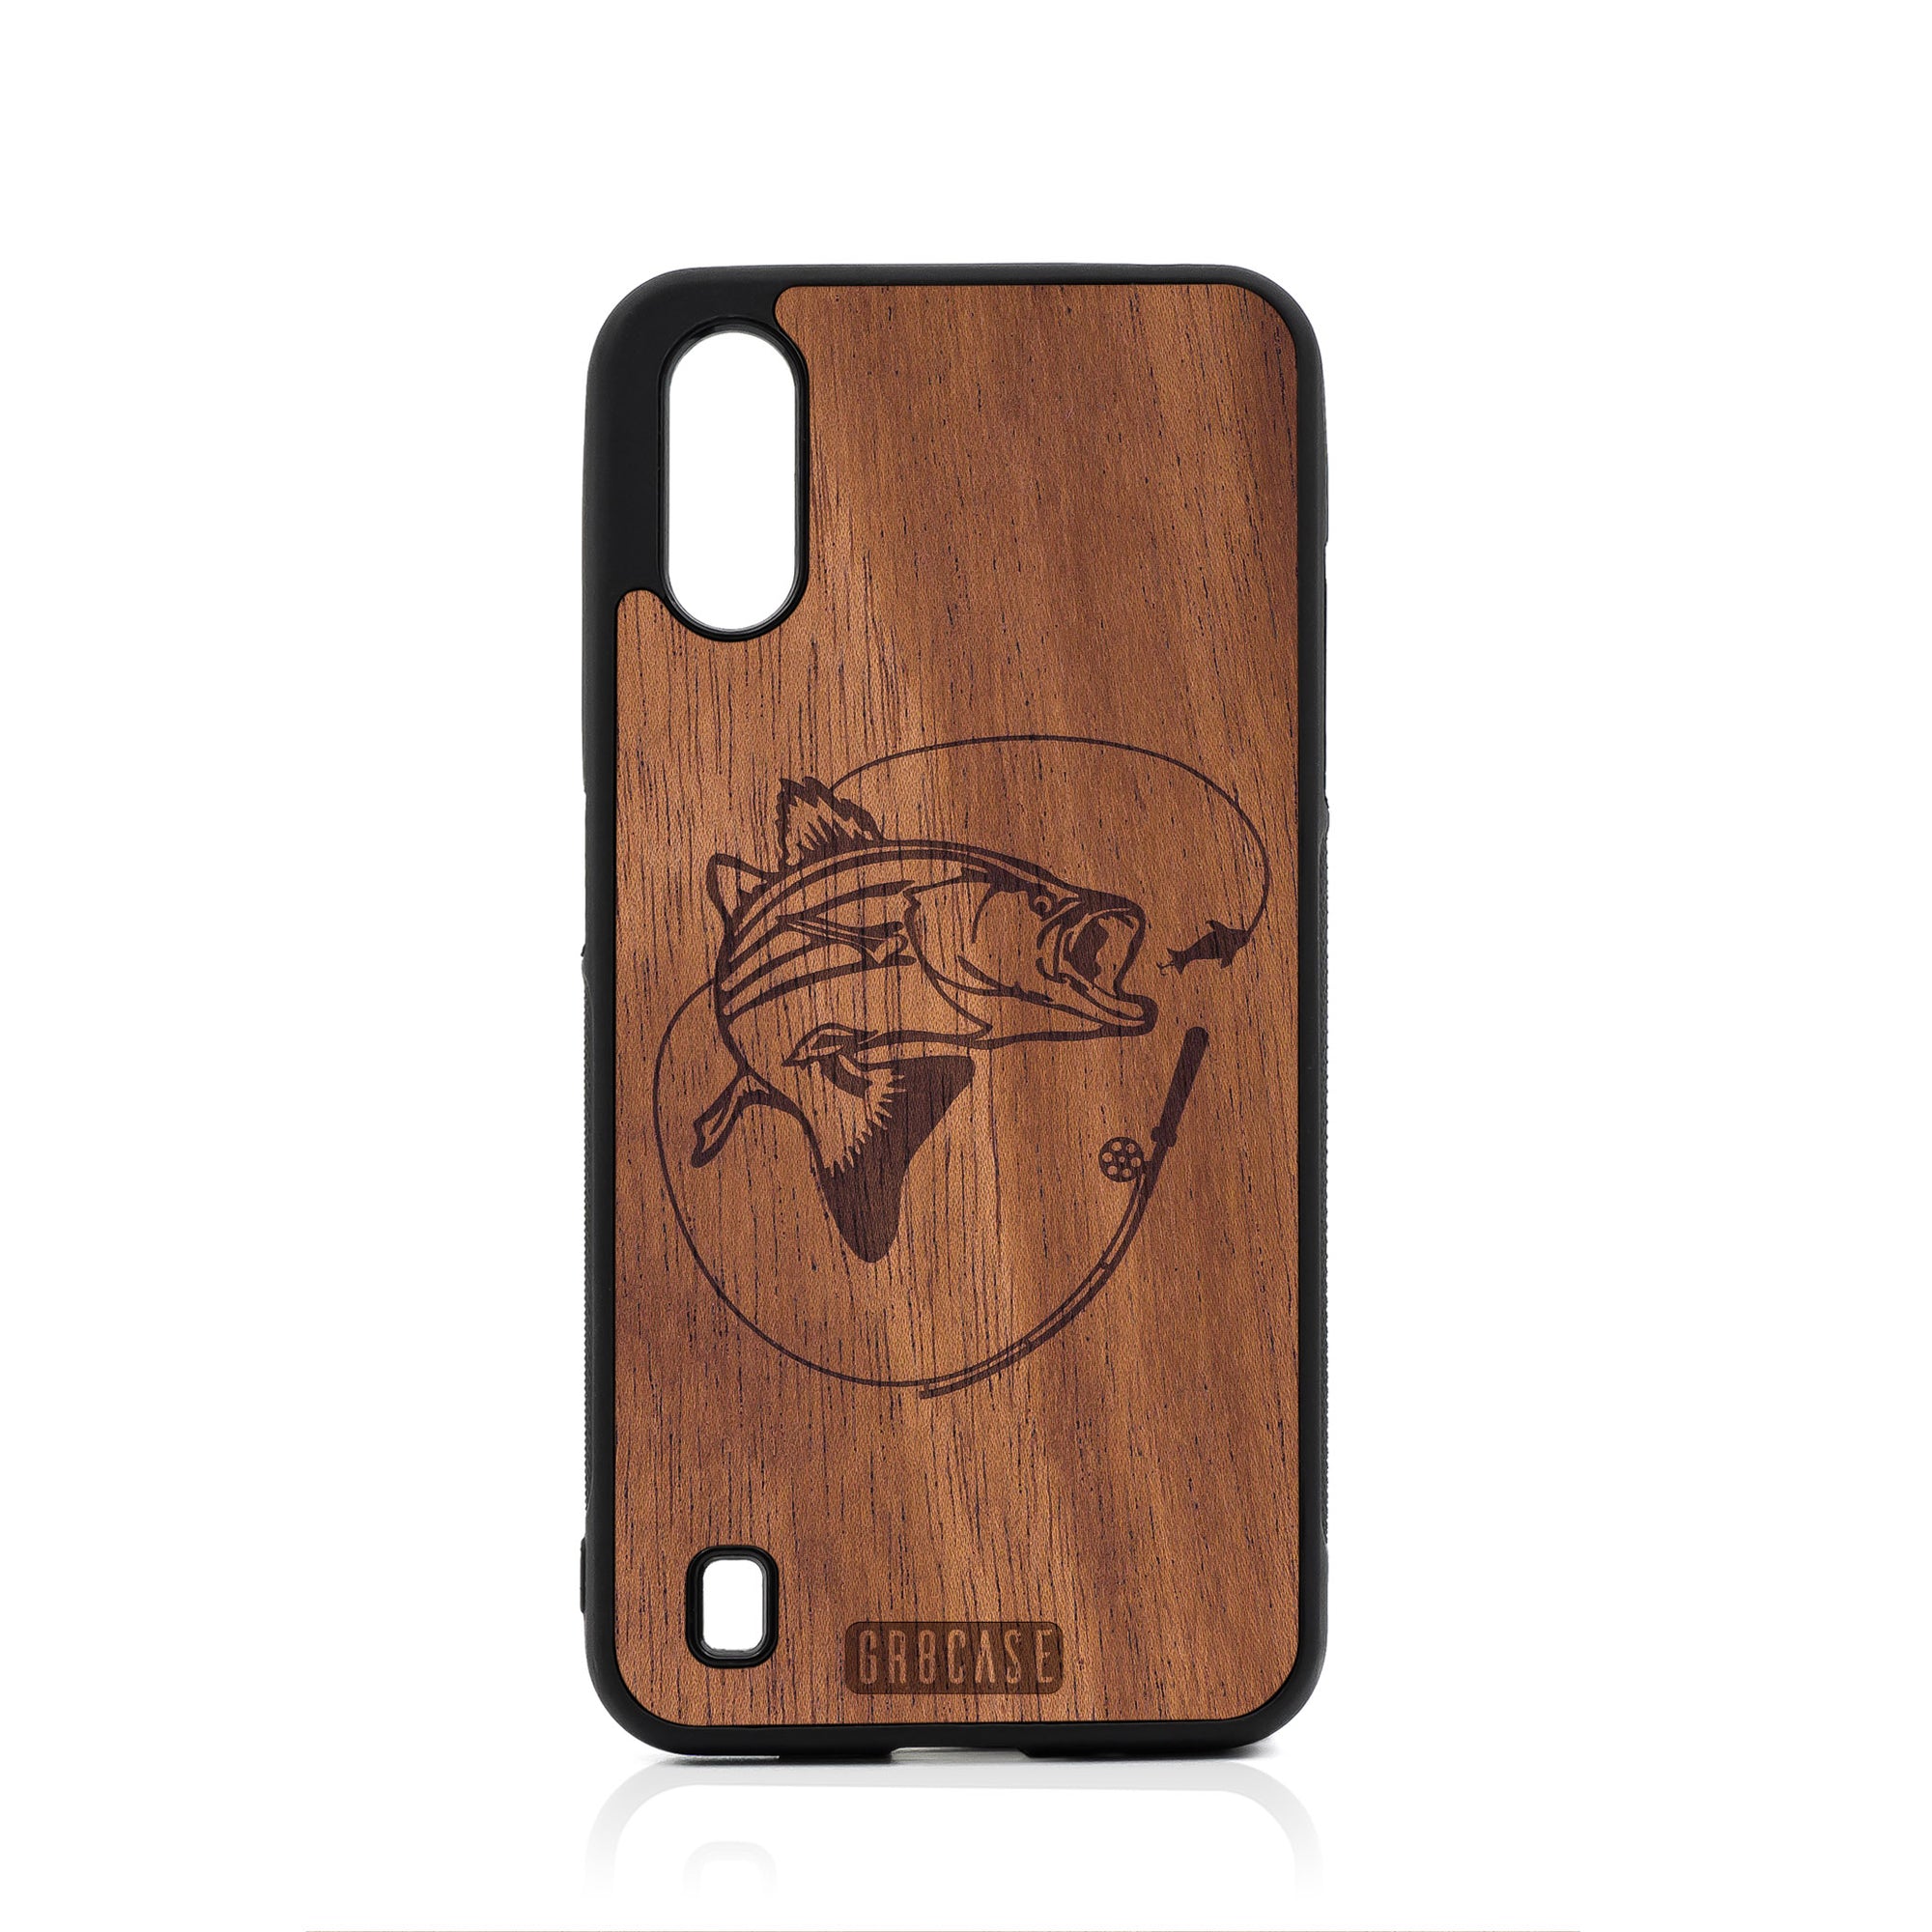 Fish and Reel Design Wood Case For Samsung Galaxy A01